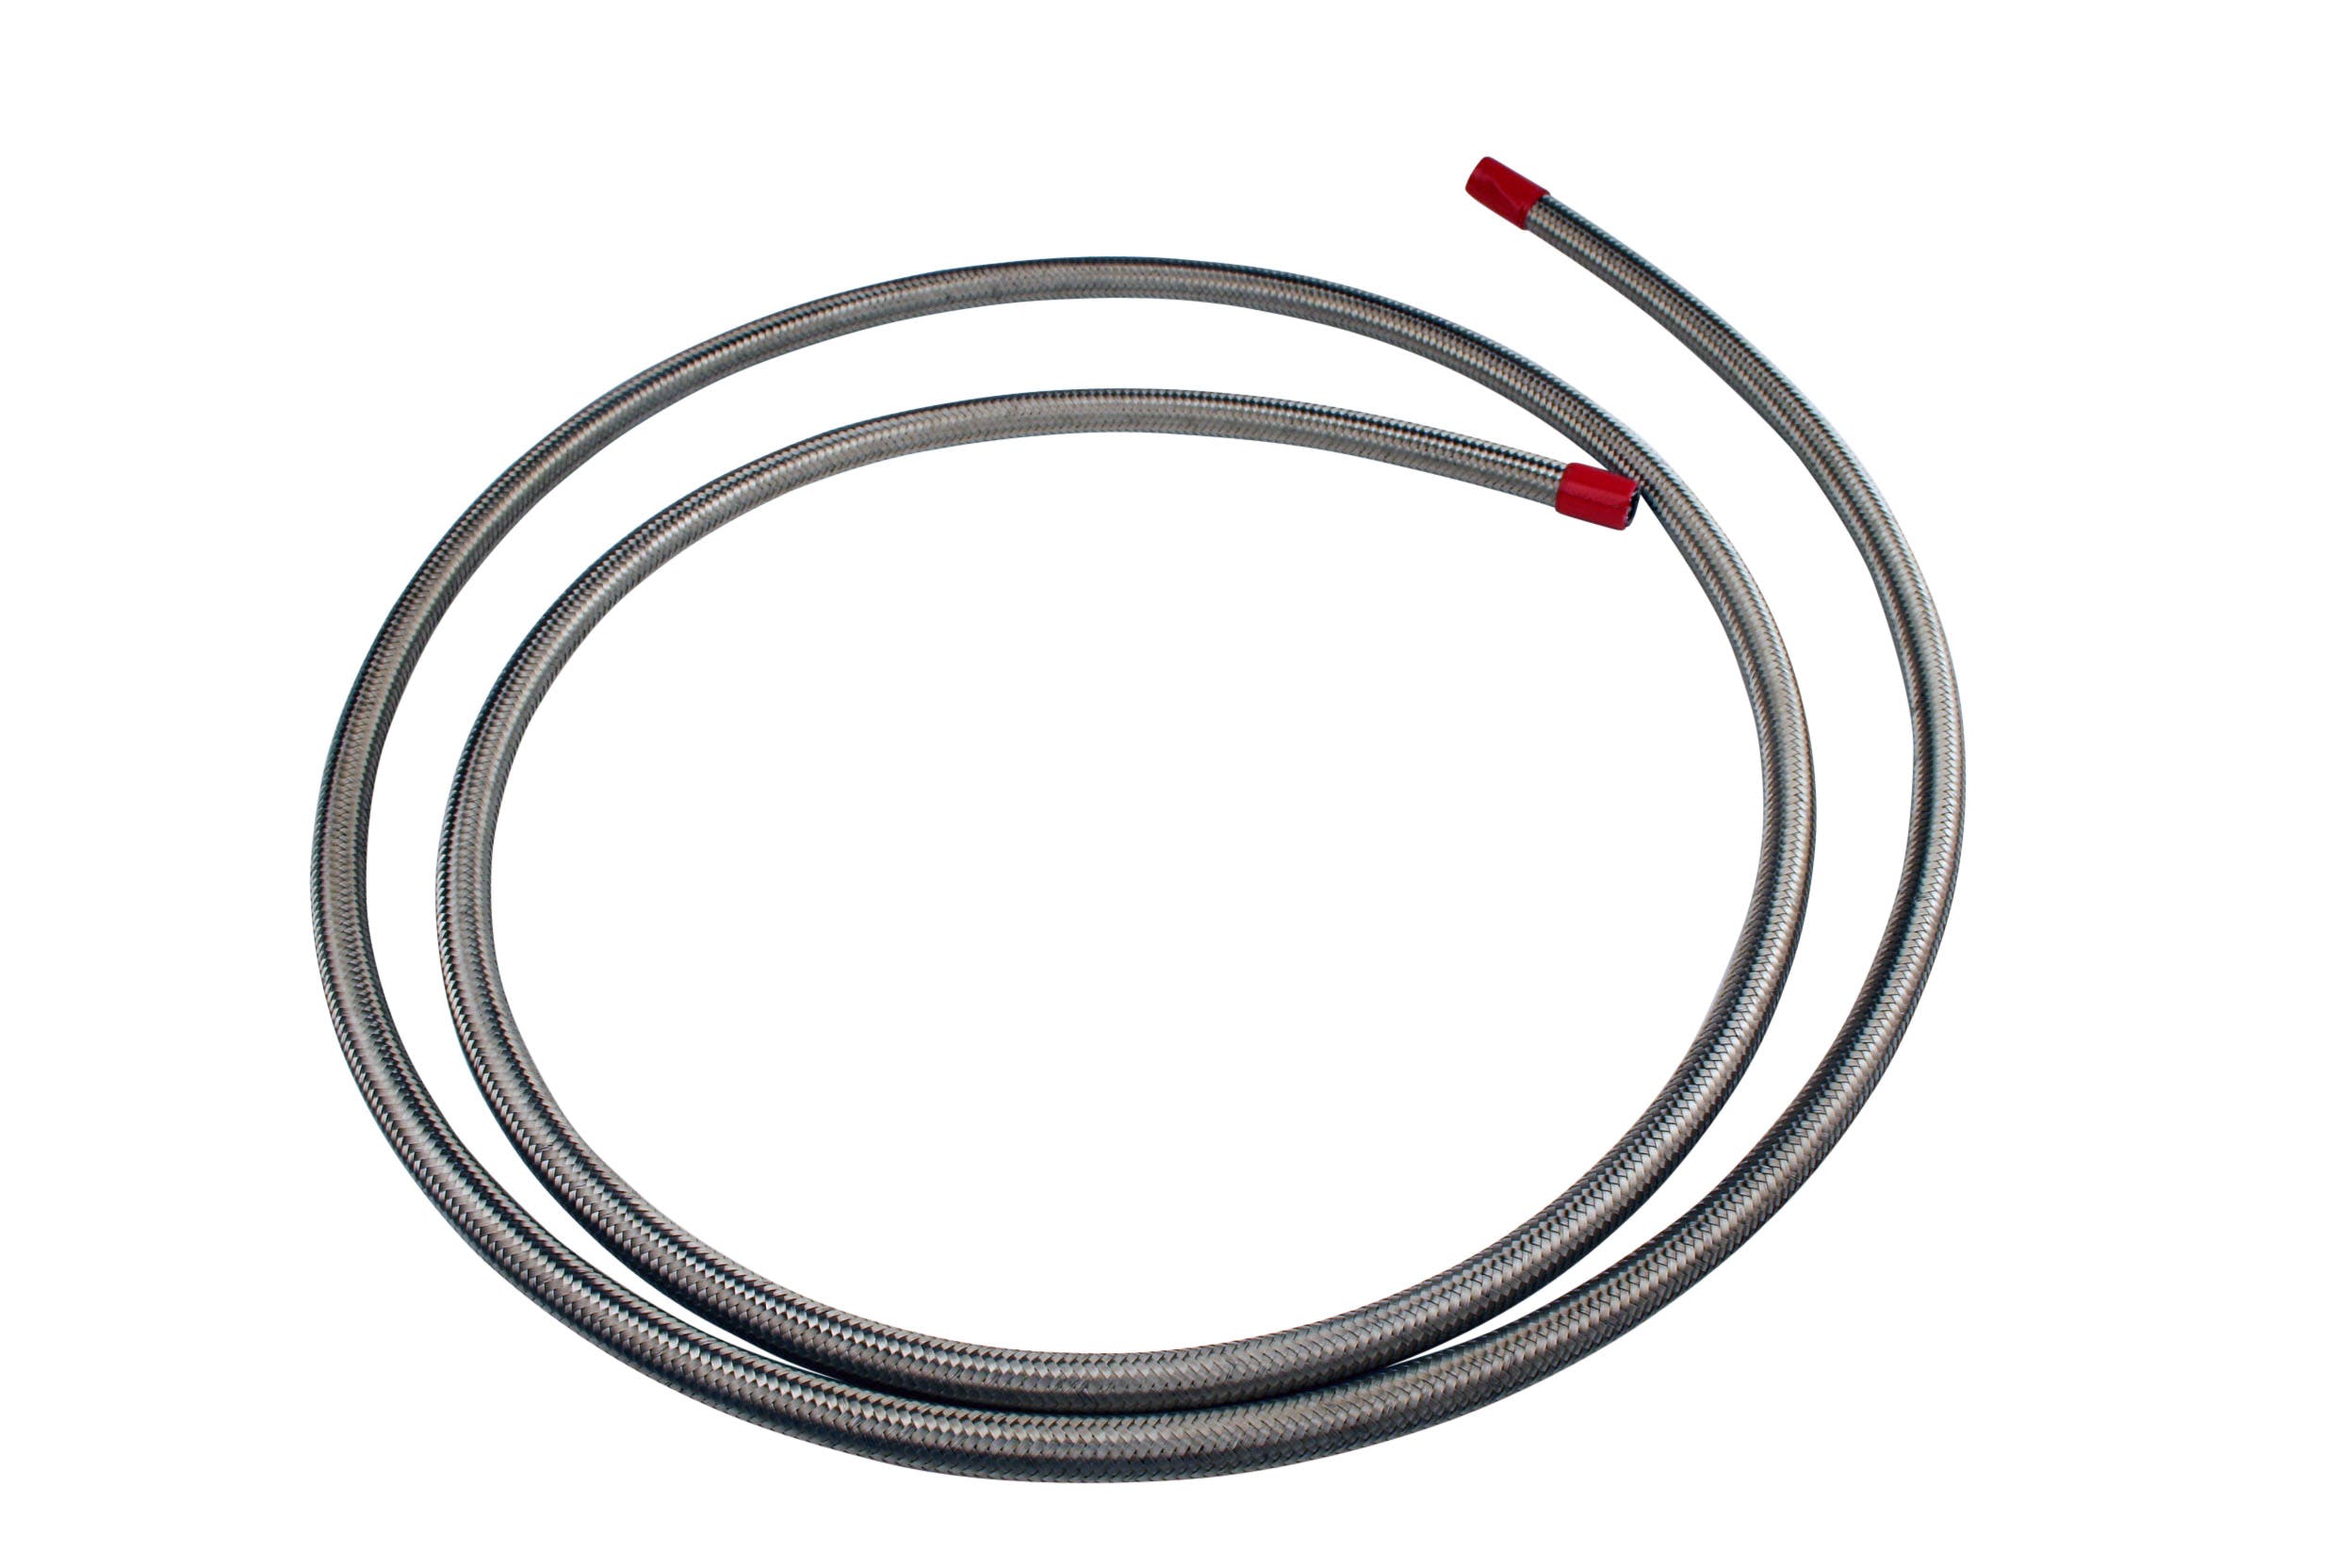 Aeromotive Fuel System 15702 Hose, Fuel, Stainless Steel Braided, AN-06 x 8